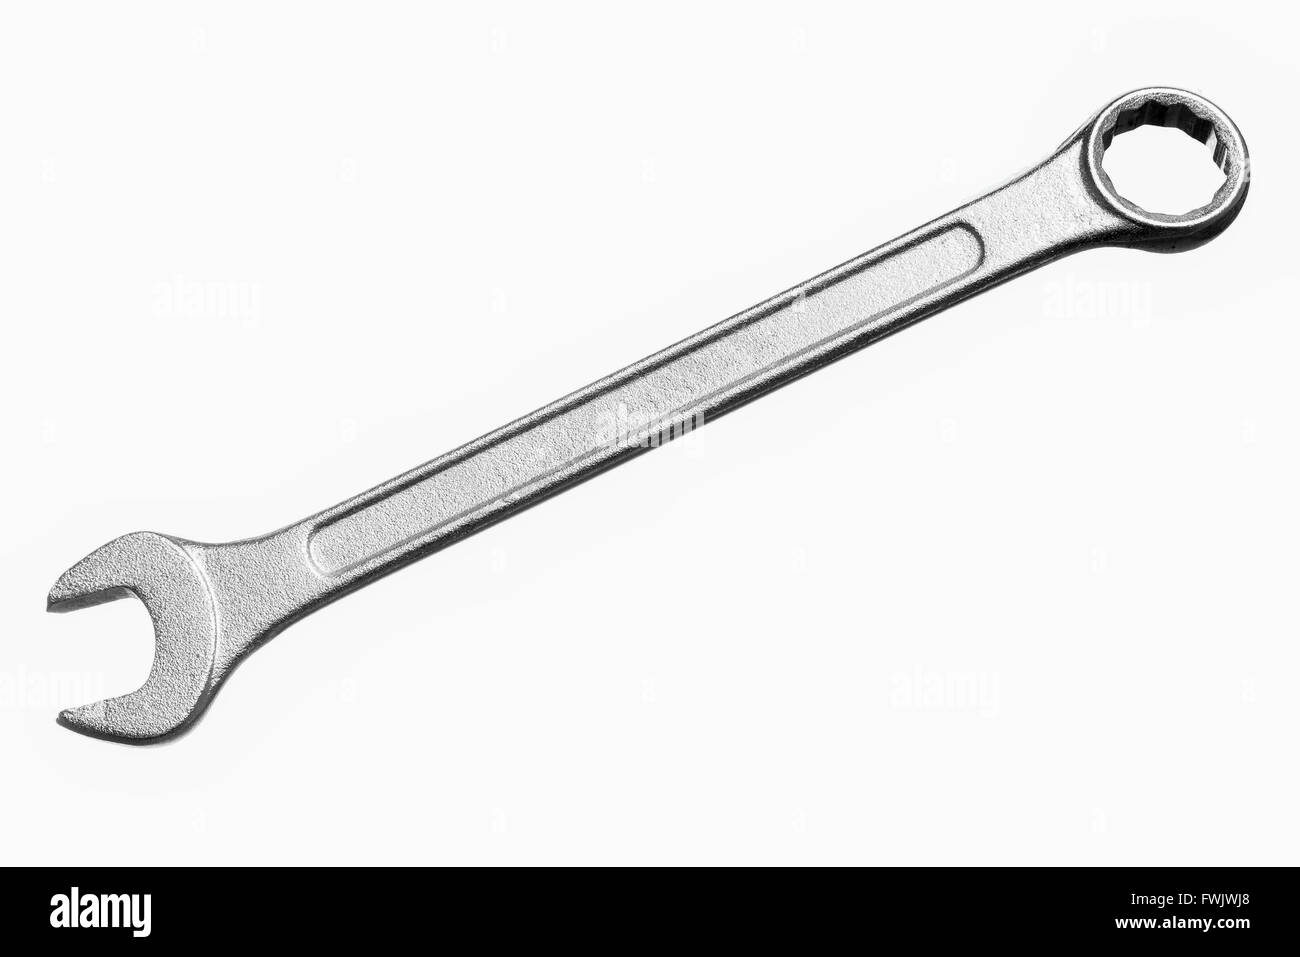 Shifting Spanner High Resolution Stock Photography and Images - Alamy